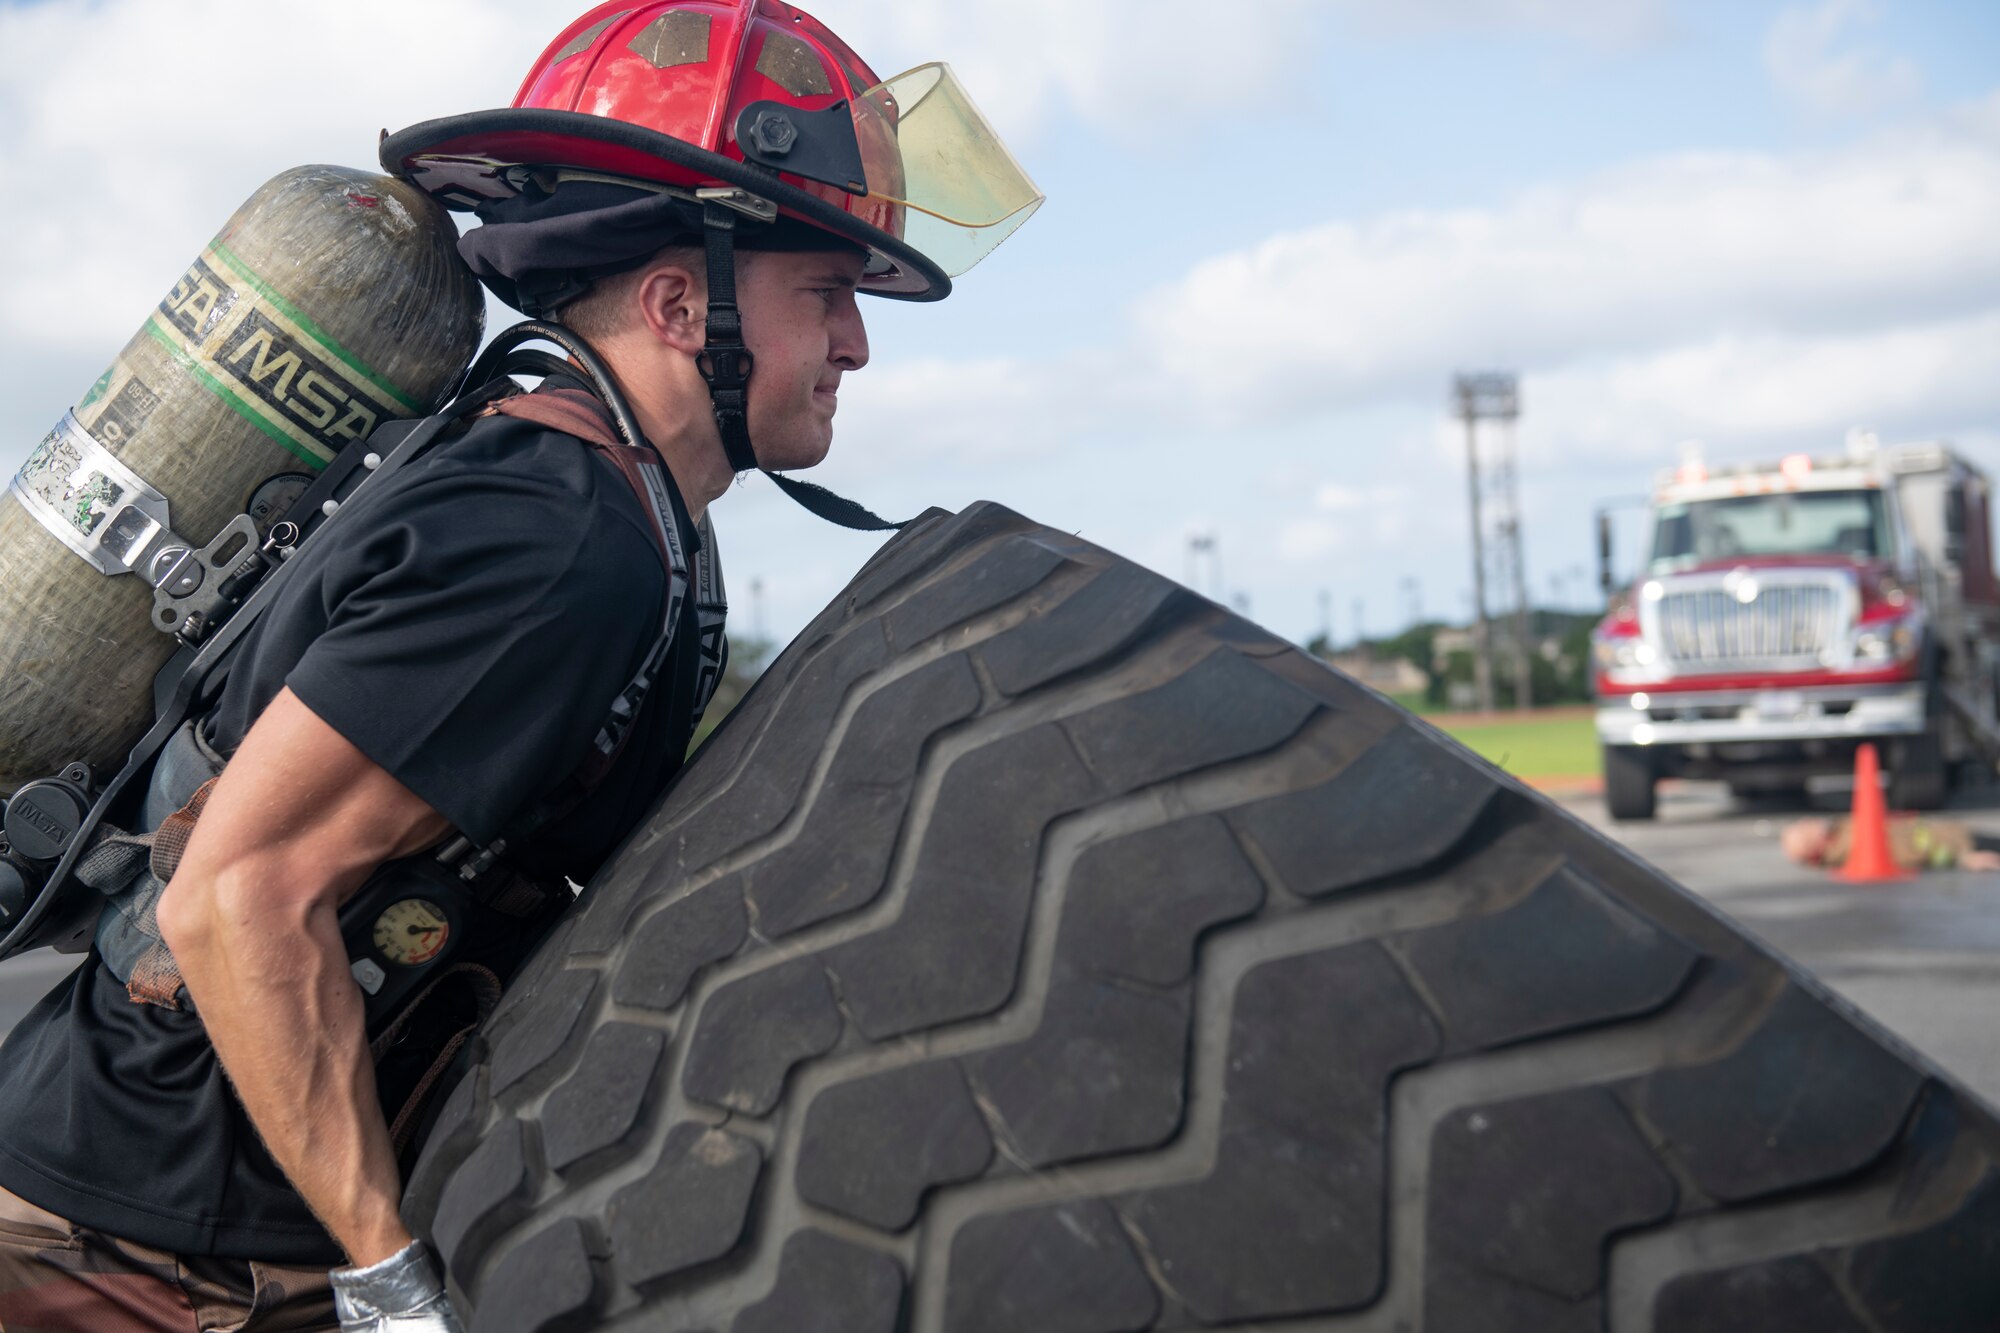 Airman 1st Class Aaron Smith, 718th Aircraft Maintenance Squadron crew chief, flips a tire at the fire muster challenge during National Fire Prevention Week at Kadena Air Base, Japan, Oct. 6, 2022. Fire Prevention Week is held annually to raise awareness on fire prevention measures and emergency procedures throughout the community. (U.S. Air Force photo by Senior Airman Jessi Roth)